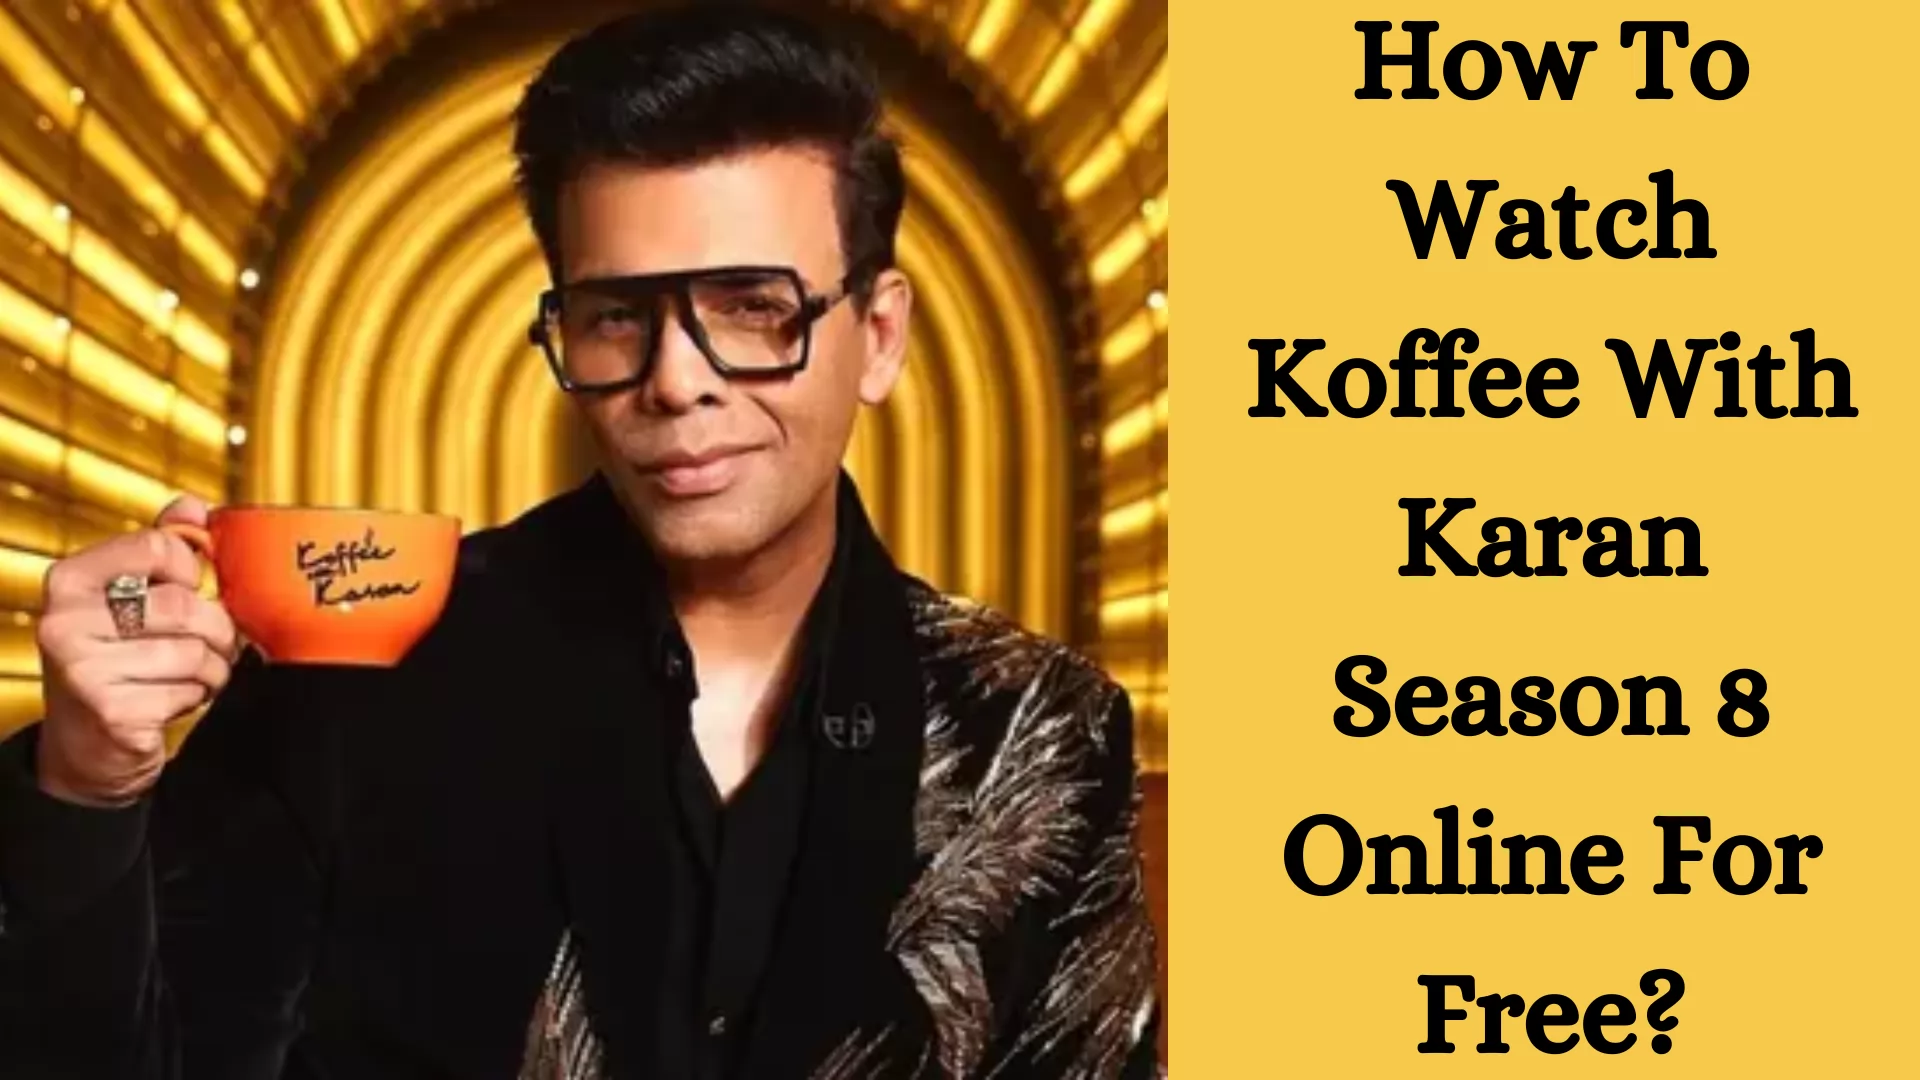 How To Watch Koffee With Karan Season 8 Online For Free?